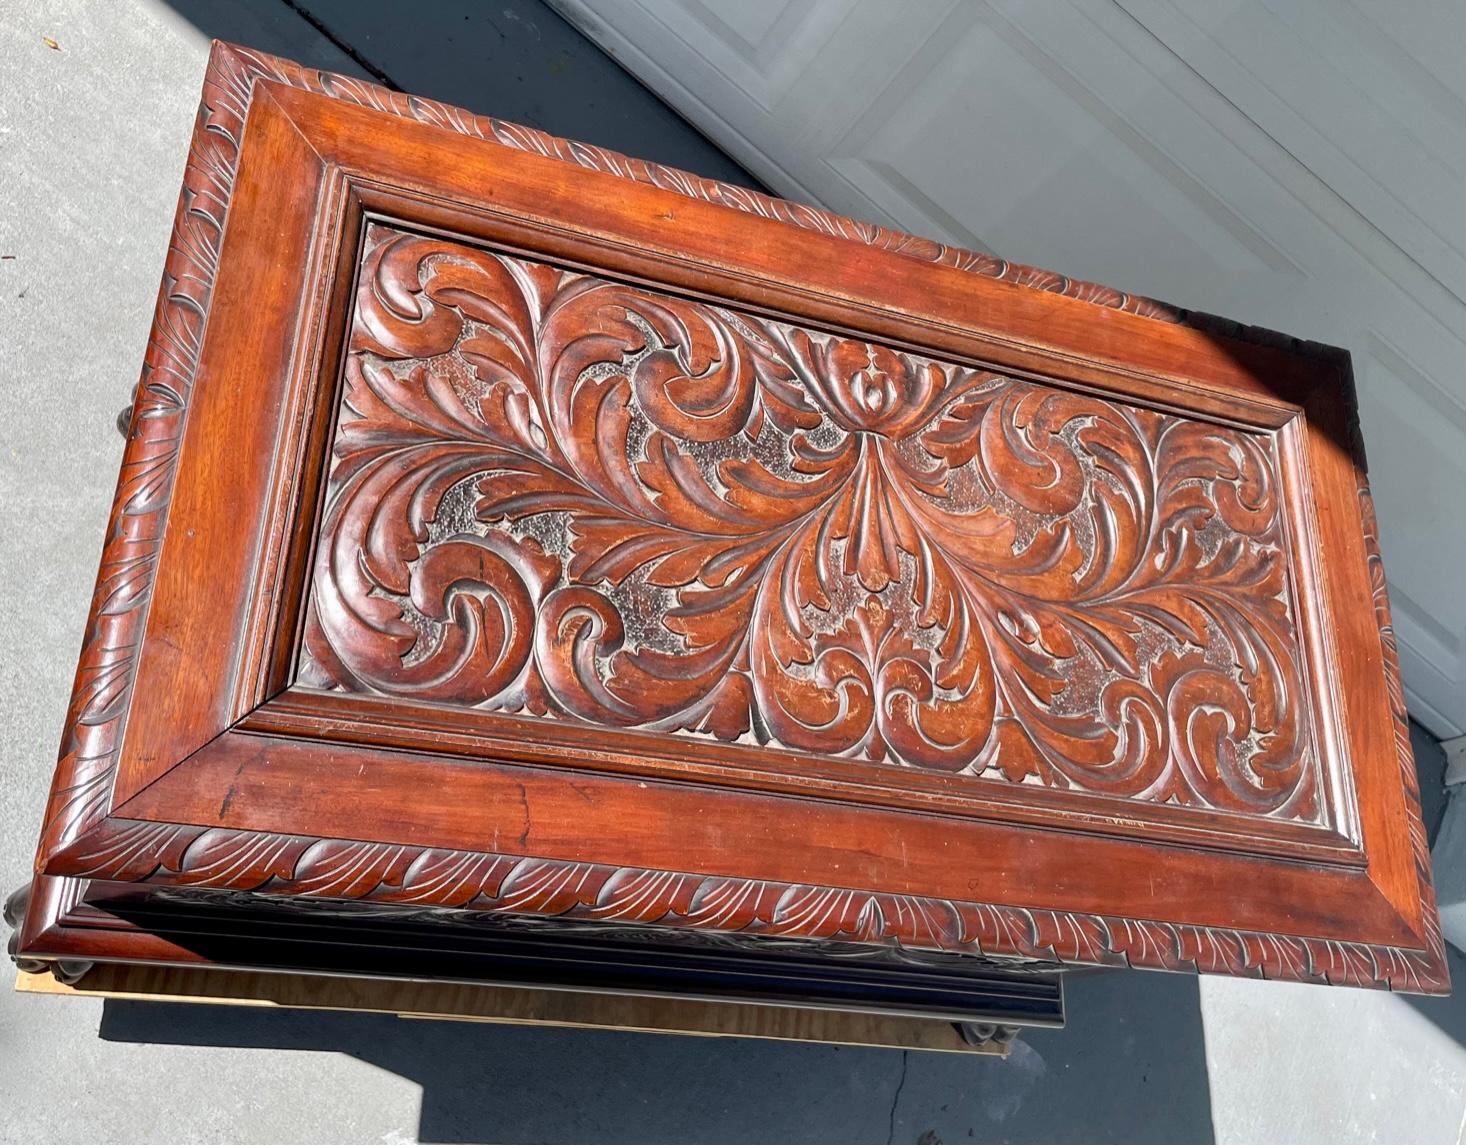 19th Century Baroque Revival Carved Wooden Blanket Chest For Sale 9